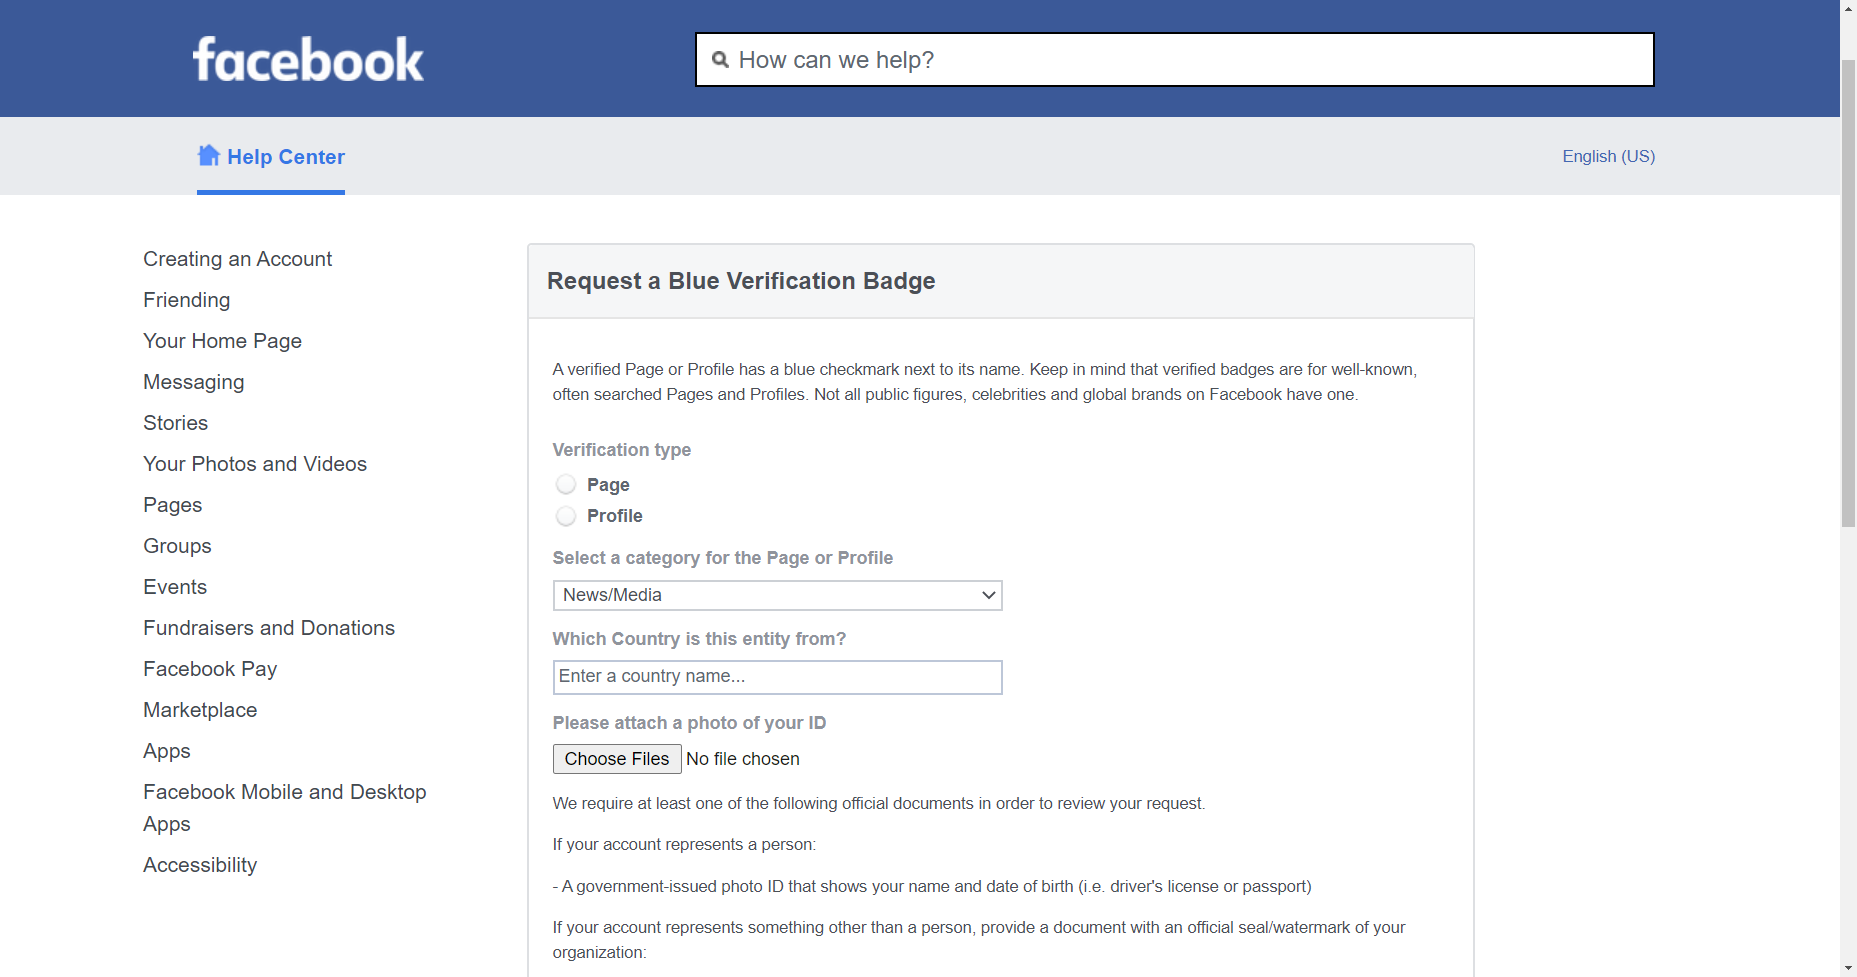 How to Get Blue Verification Badge on Facebook Pankey Curre1961